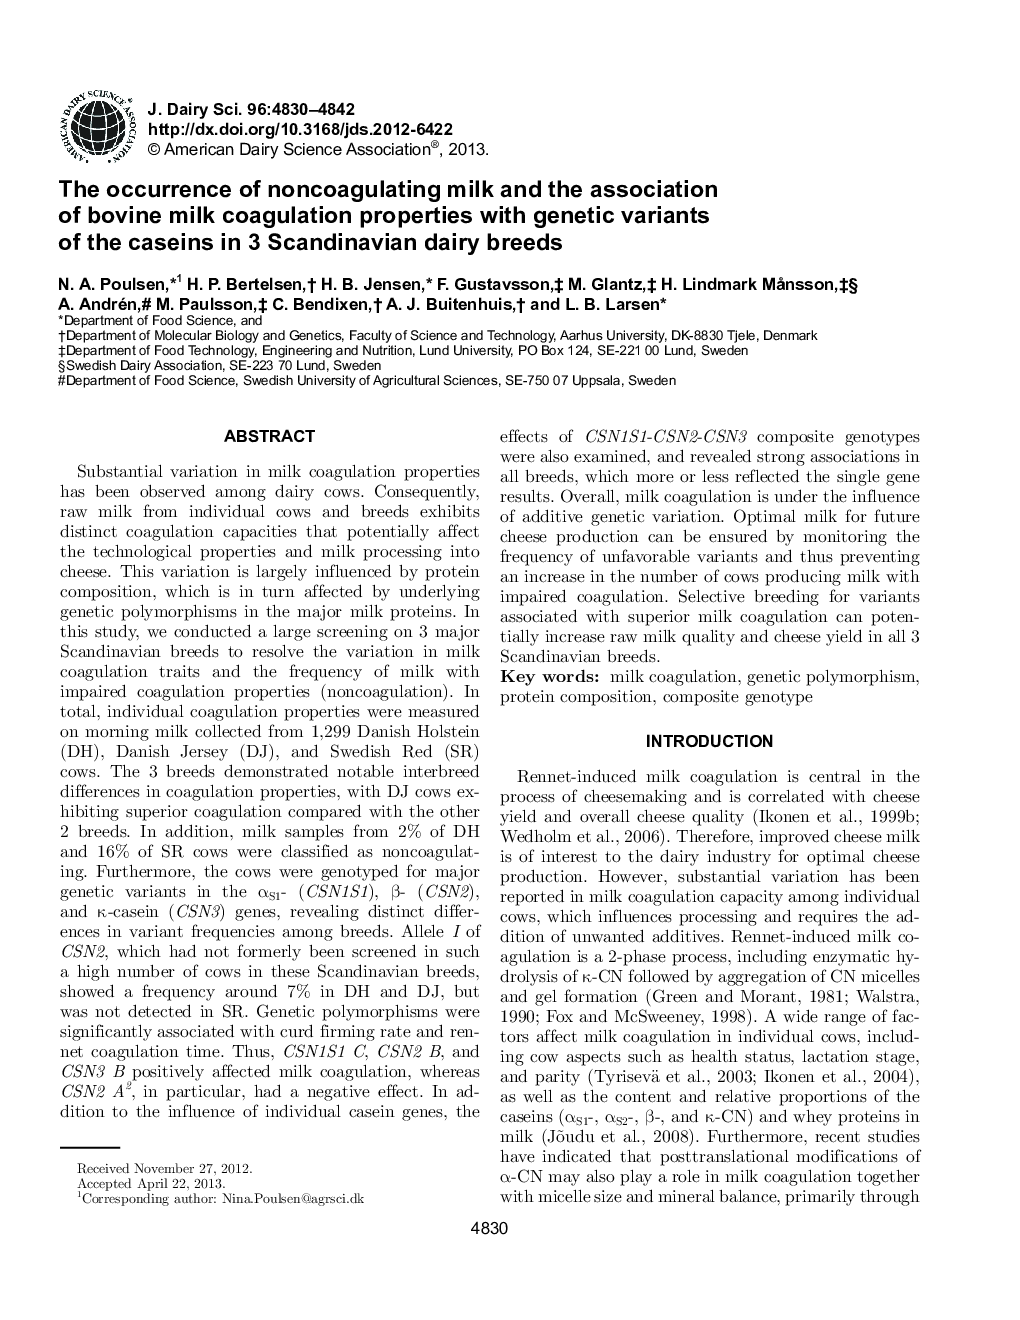 The occurrence of noncoagulating milk and the association of bovine milk coagulation properties with genetic variants of the caseins in 3 Scandinavian dairy breeds